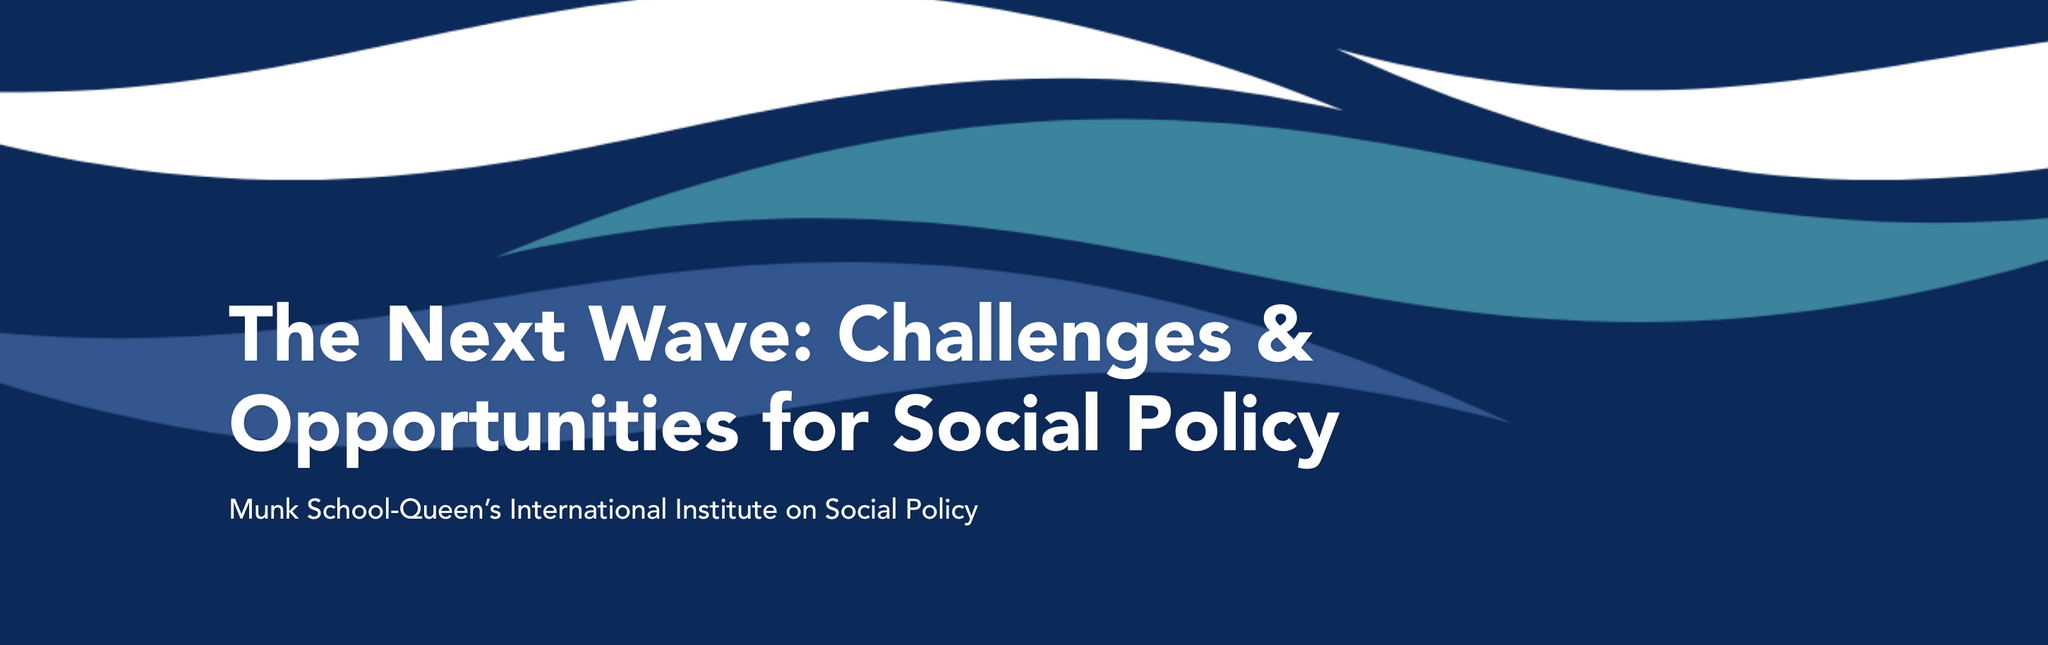 Munk-Queen's International Institute on Social Policy: The Next Wave: Challenges and Opportunities for Social Policy in the Coming Decade